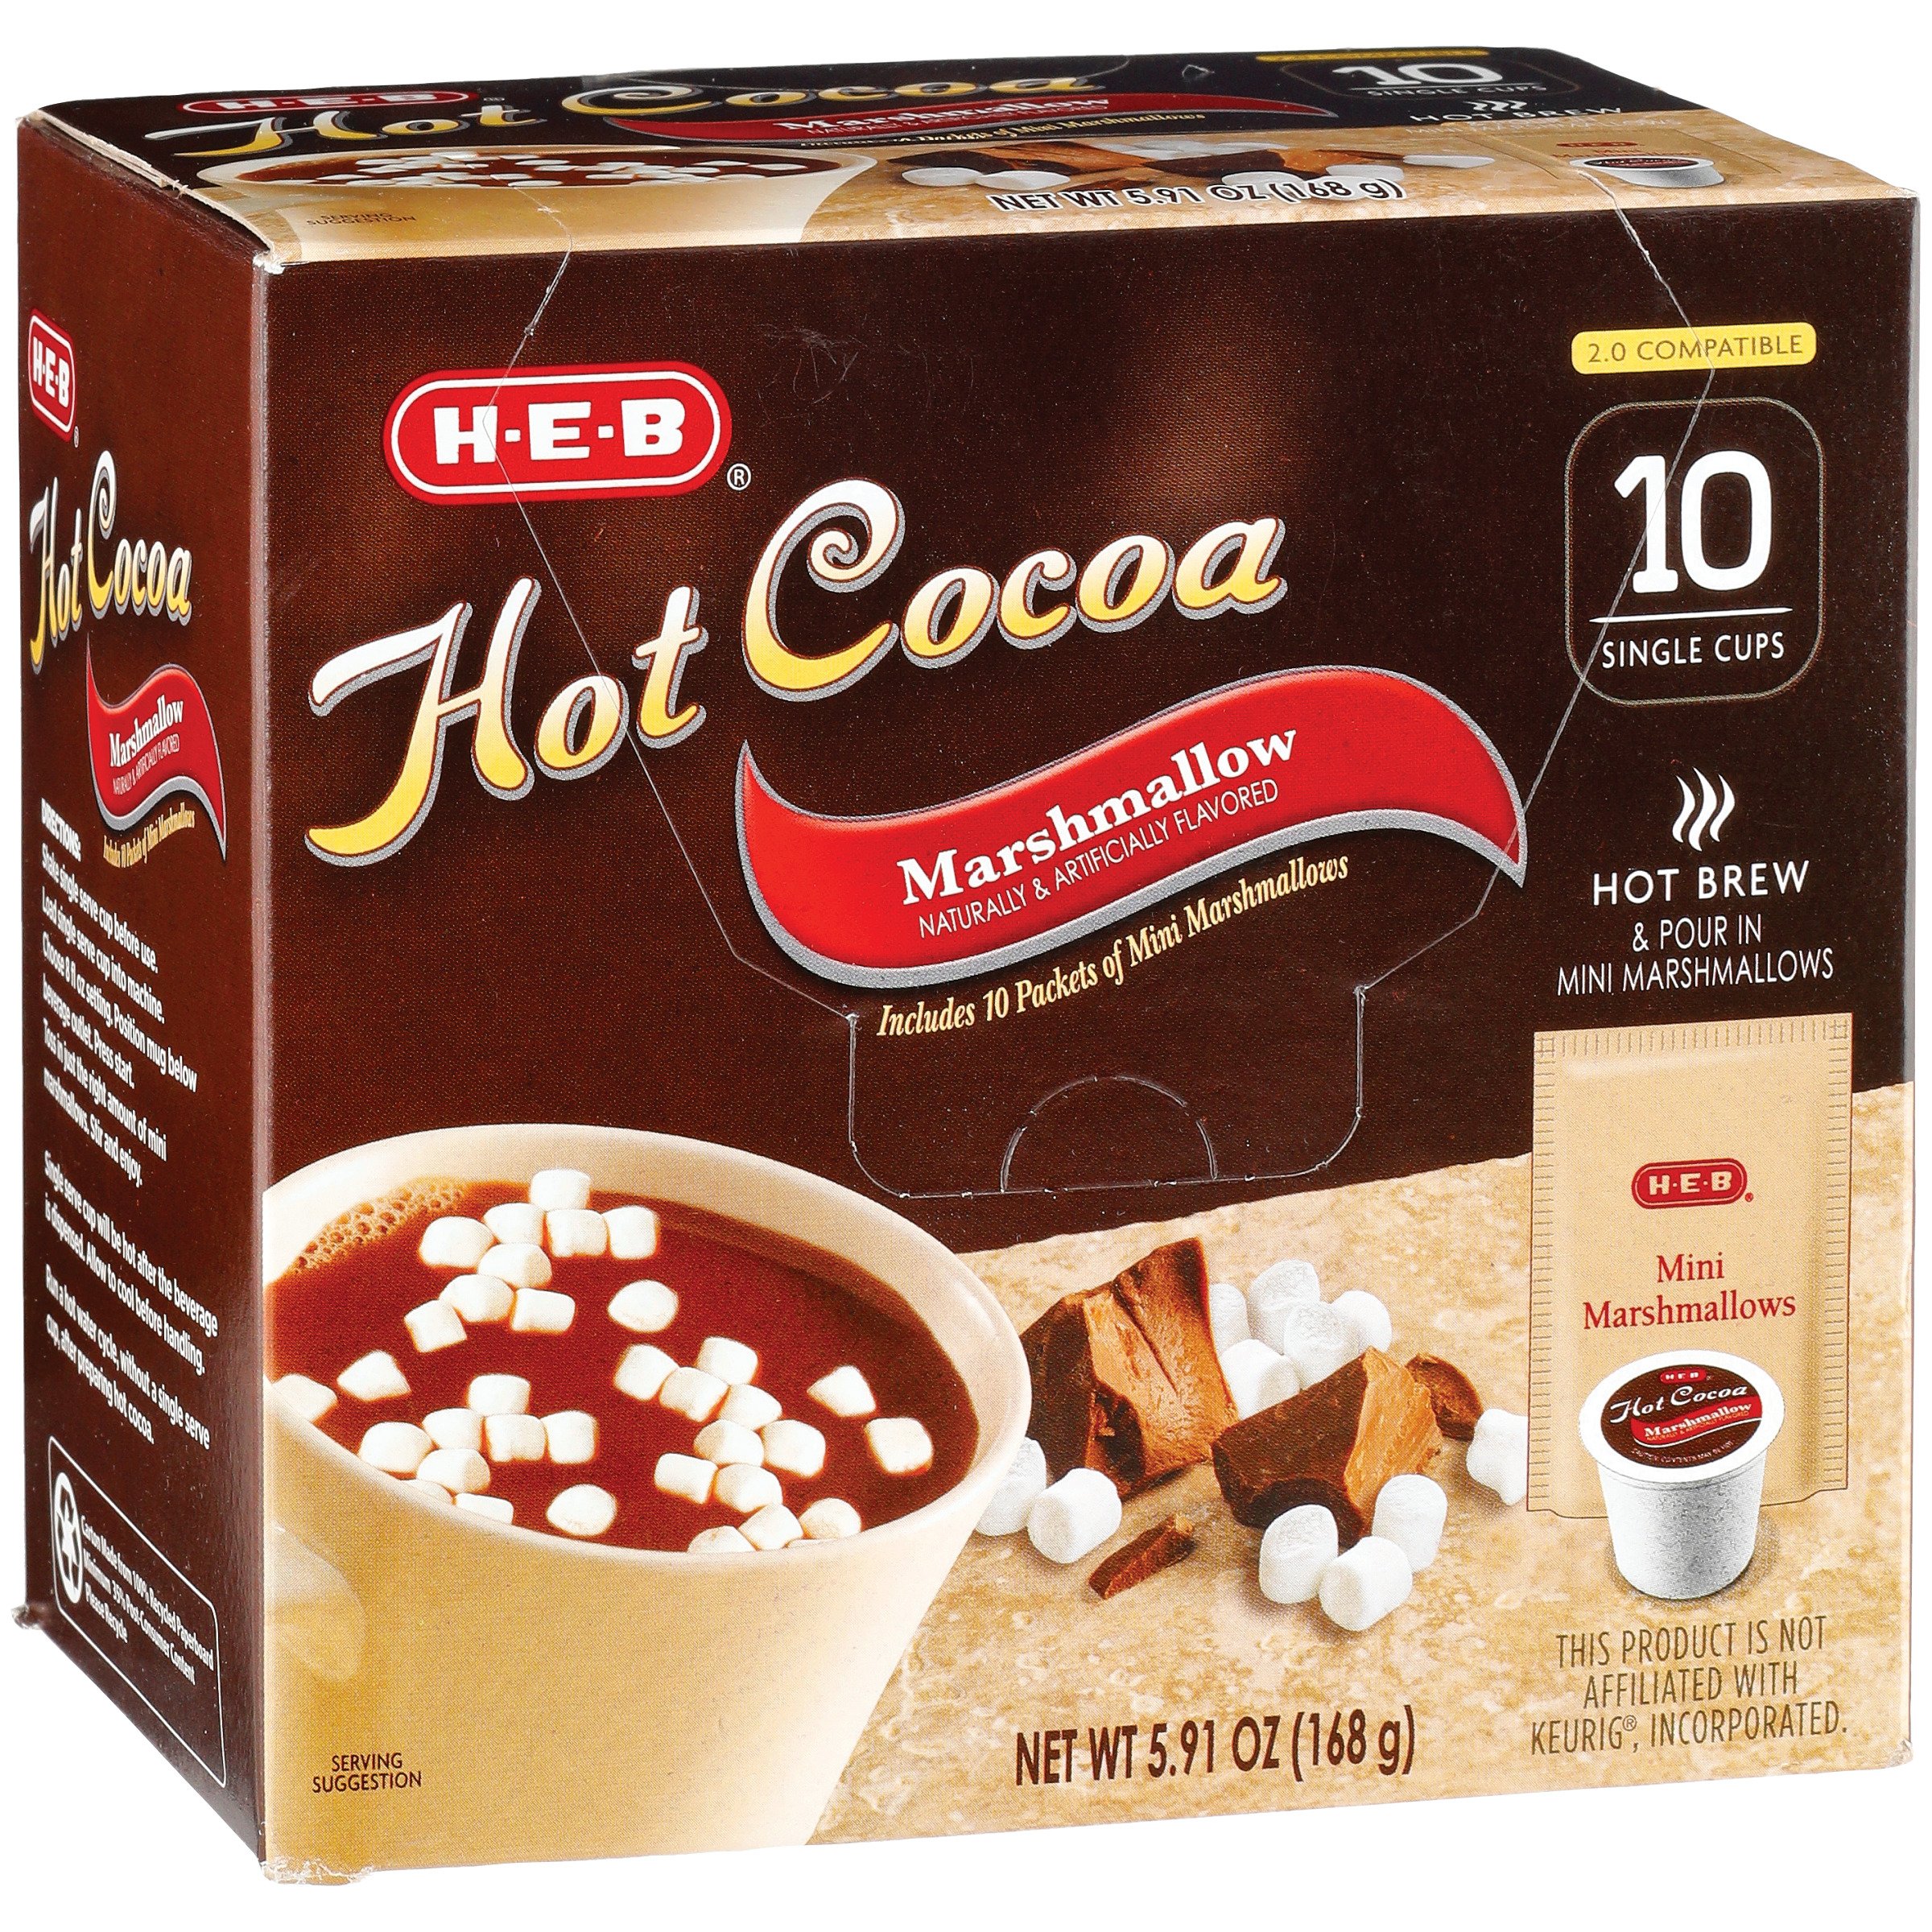 Make 'n Mold Microwavable Caramel Cup - Shop Baking Chocolate & Candies at  H-E-B